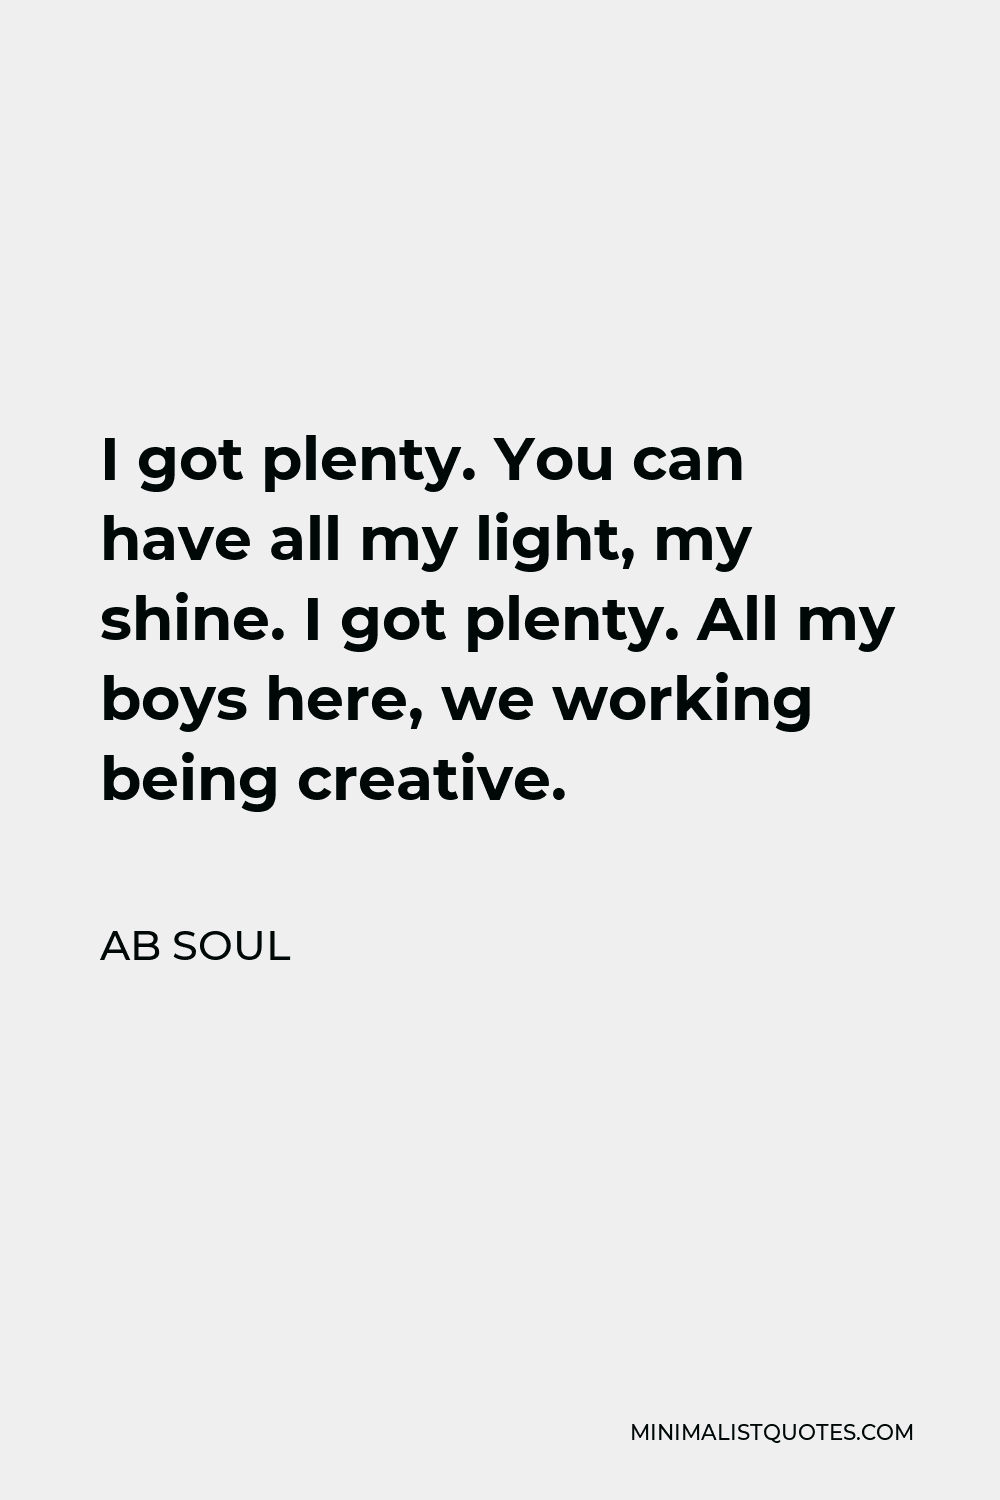 AB Soul Quote - I got plenty. You can have all my light, my shine. I got plenty. All my boys here, we working being creative.